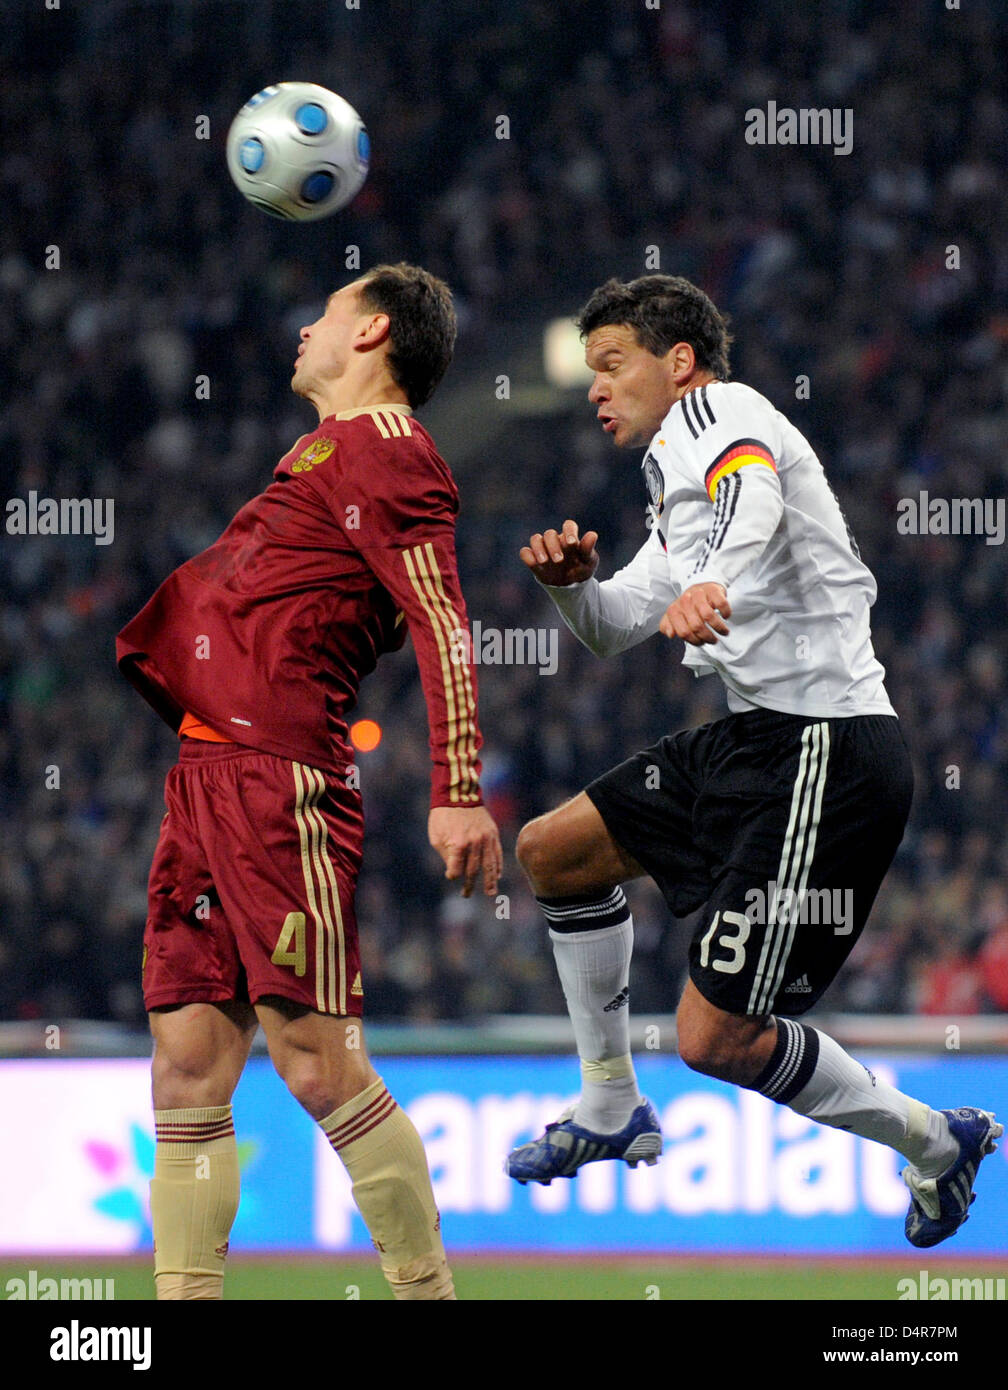 Germany?s Michael Ballack (R) vies for the ball with Russia?s  Sergei Ignashevich during the World Cup 2010, Group 4 qualifier Russia vs Germany at Luzhniki Stadium in Moscow, Russia, 10 October 2009. Germany won 1-0. Photo: Marcus Brandt Stock Photo